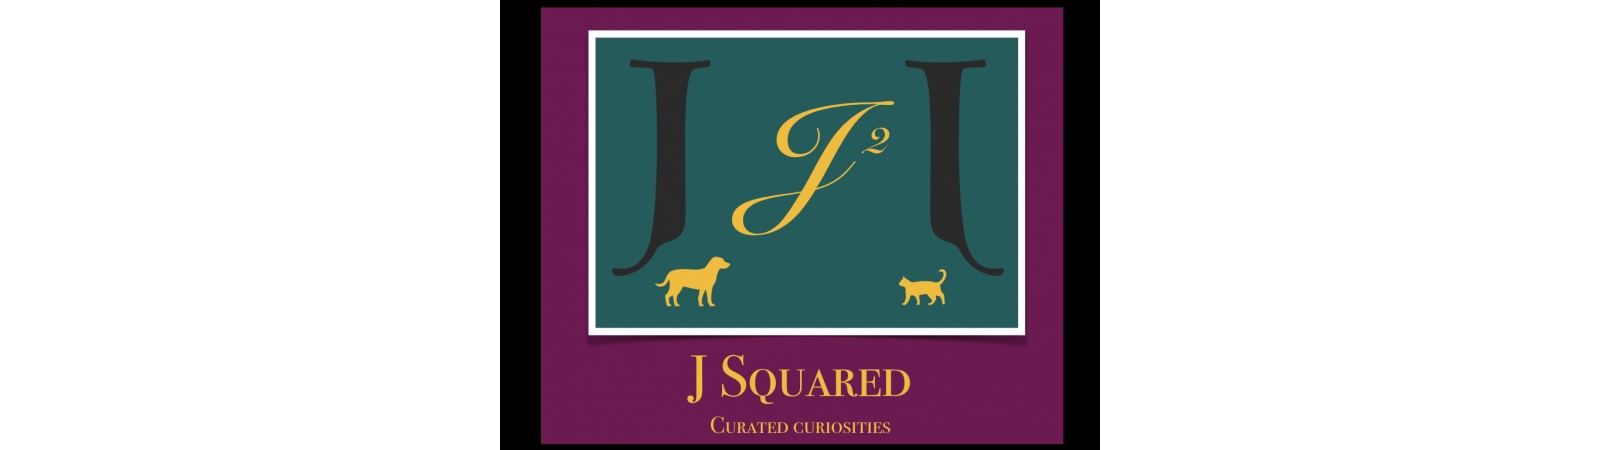 J Squared...Curated Curiosities | Auction Ninja